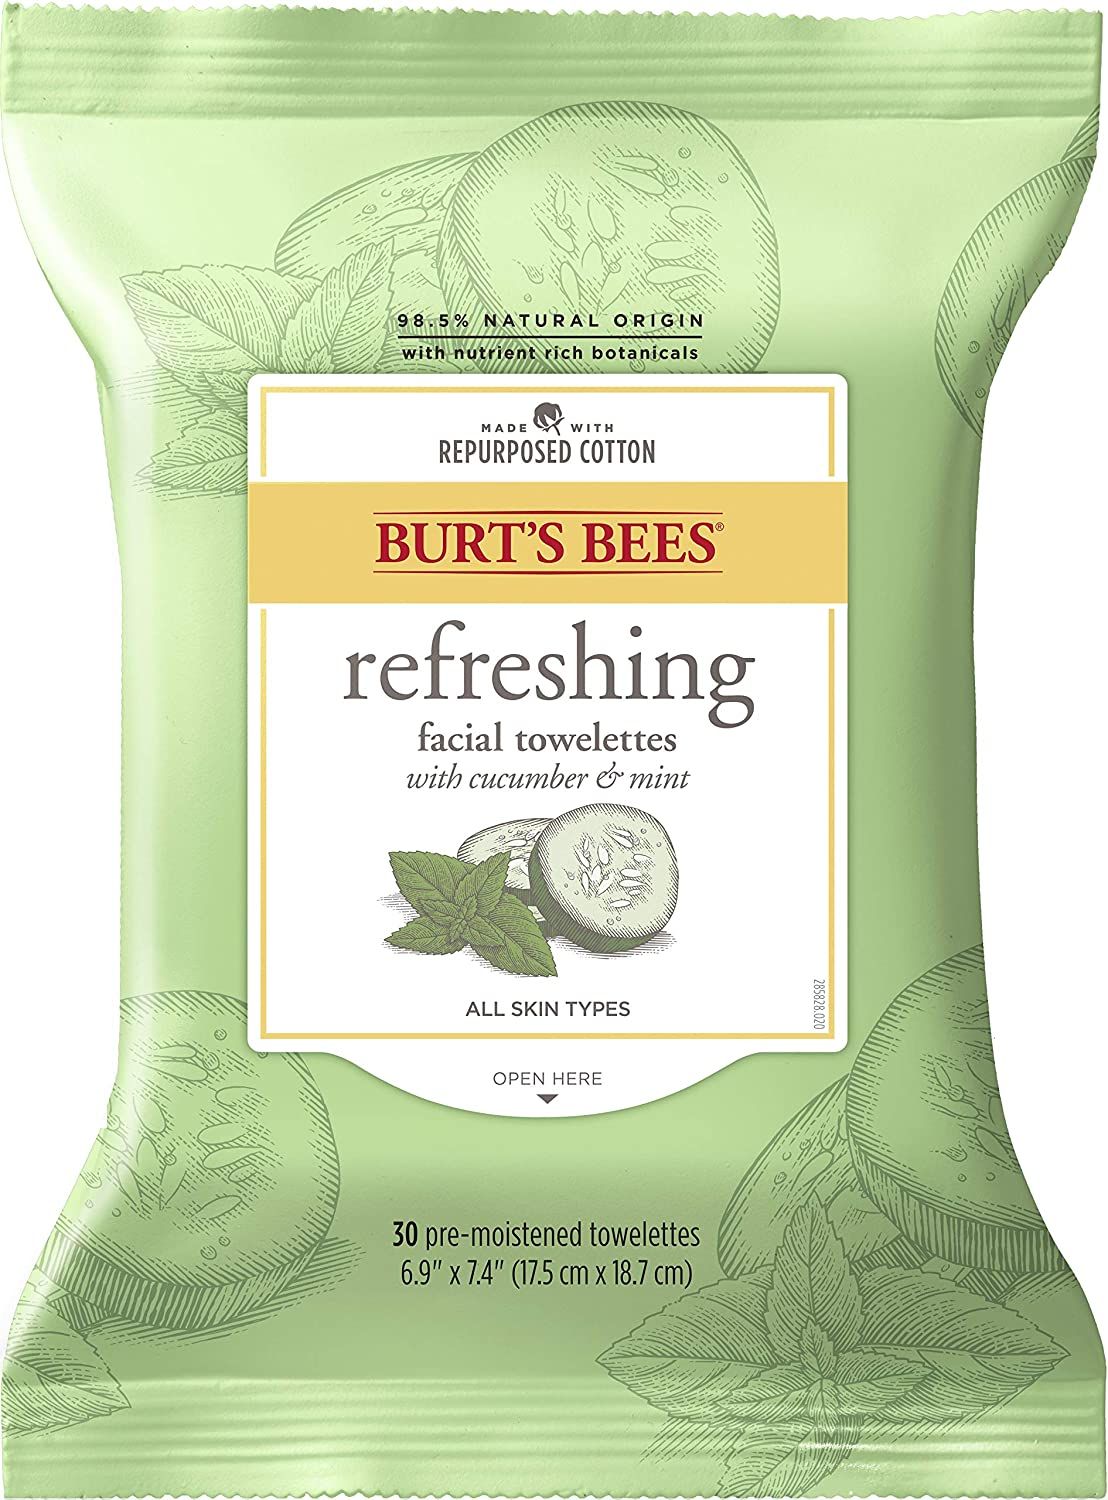 Burt’s Bees® Refreshing Facial Cleanser Towelettes & Makeup Remover with Cucumber & Mint - 30 ct